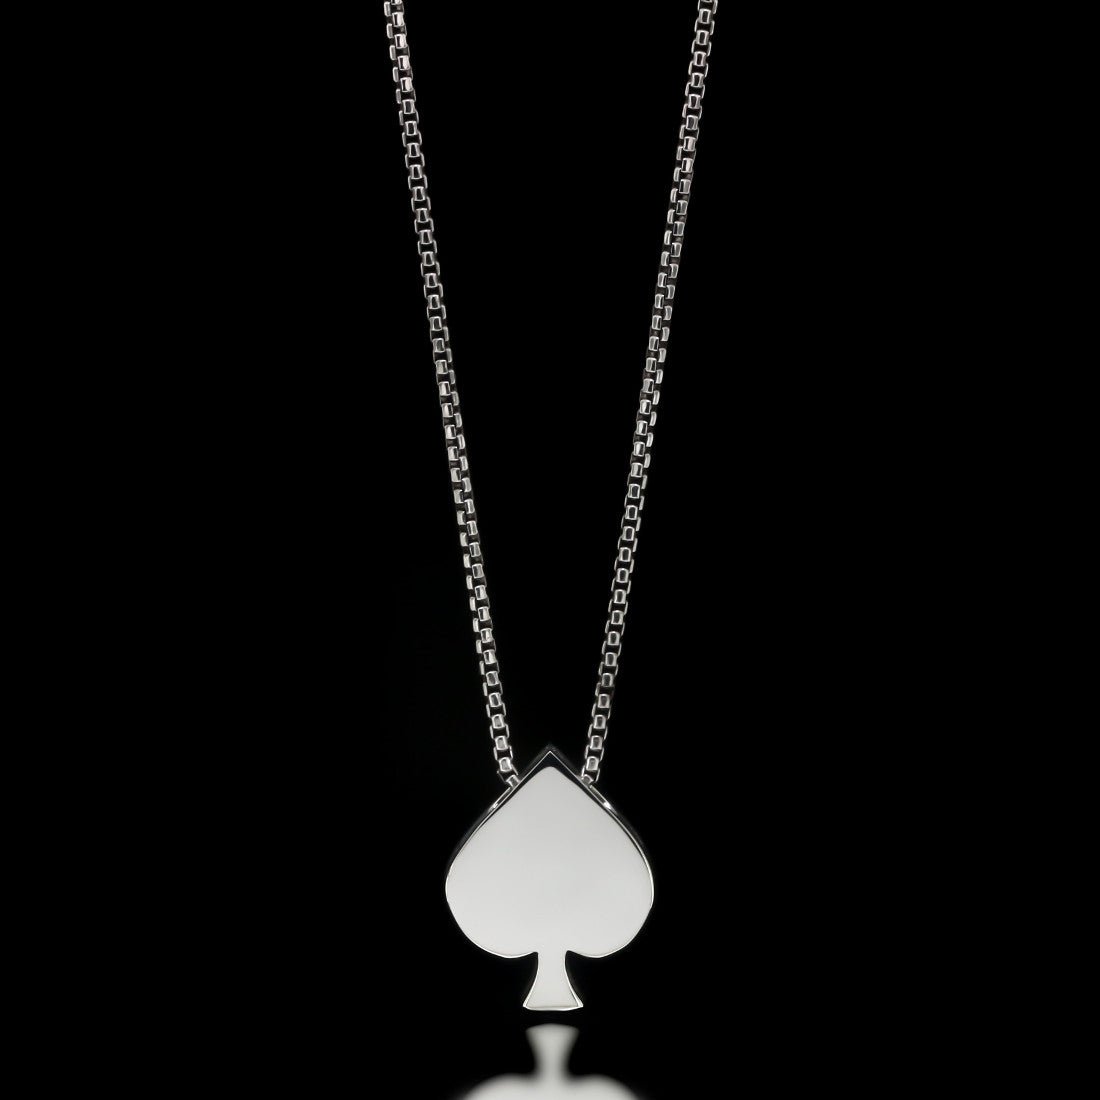 Spade Slider Necklace - Sterling Silver - Twisted Love NYC